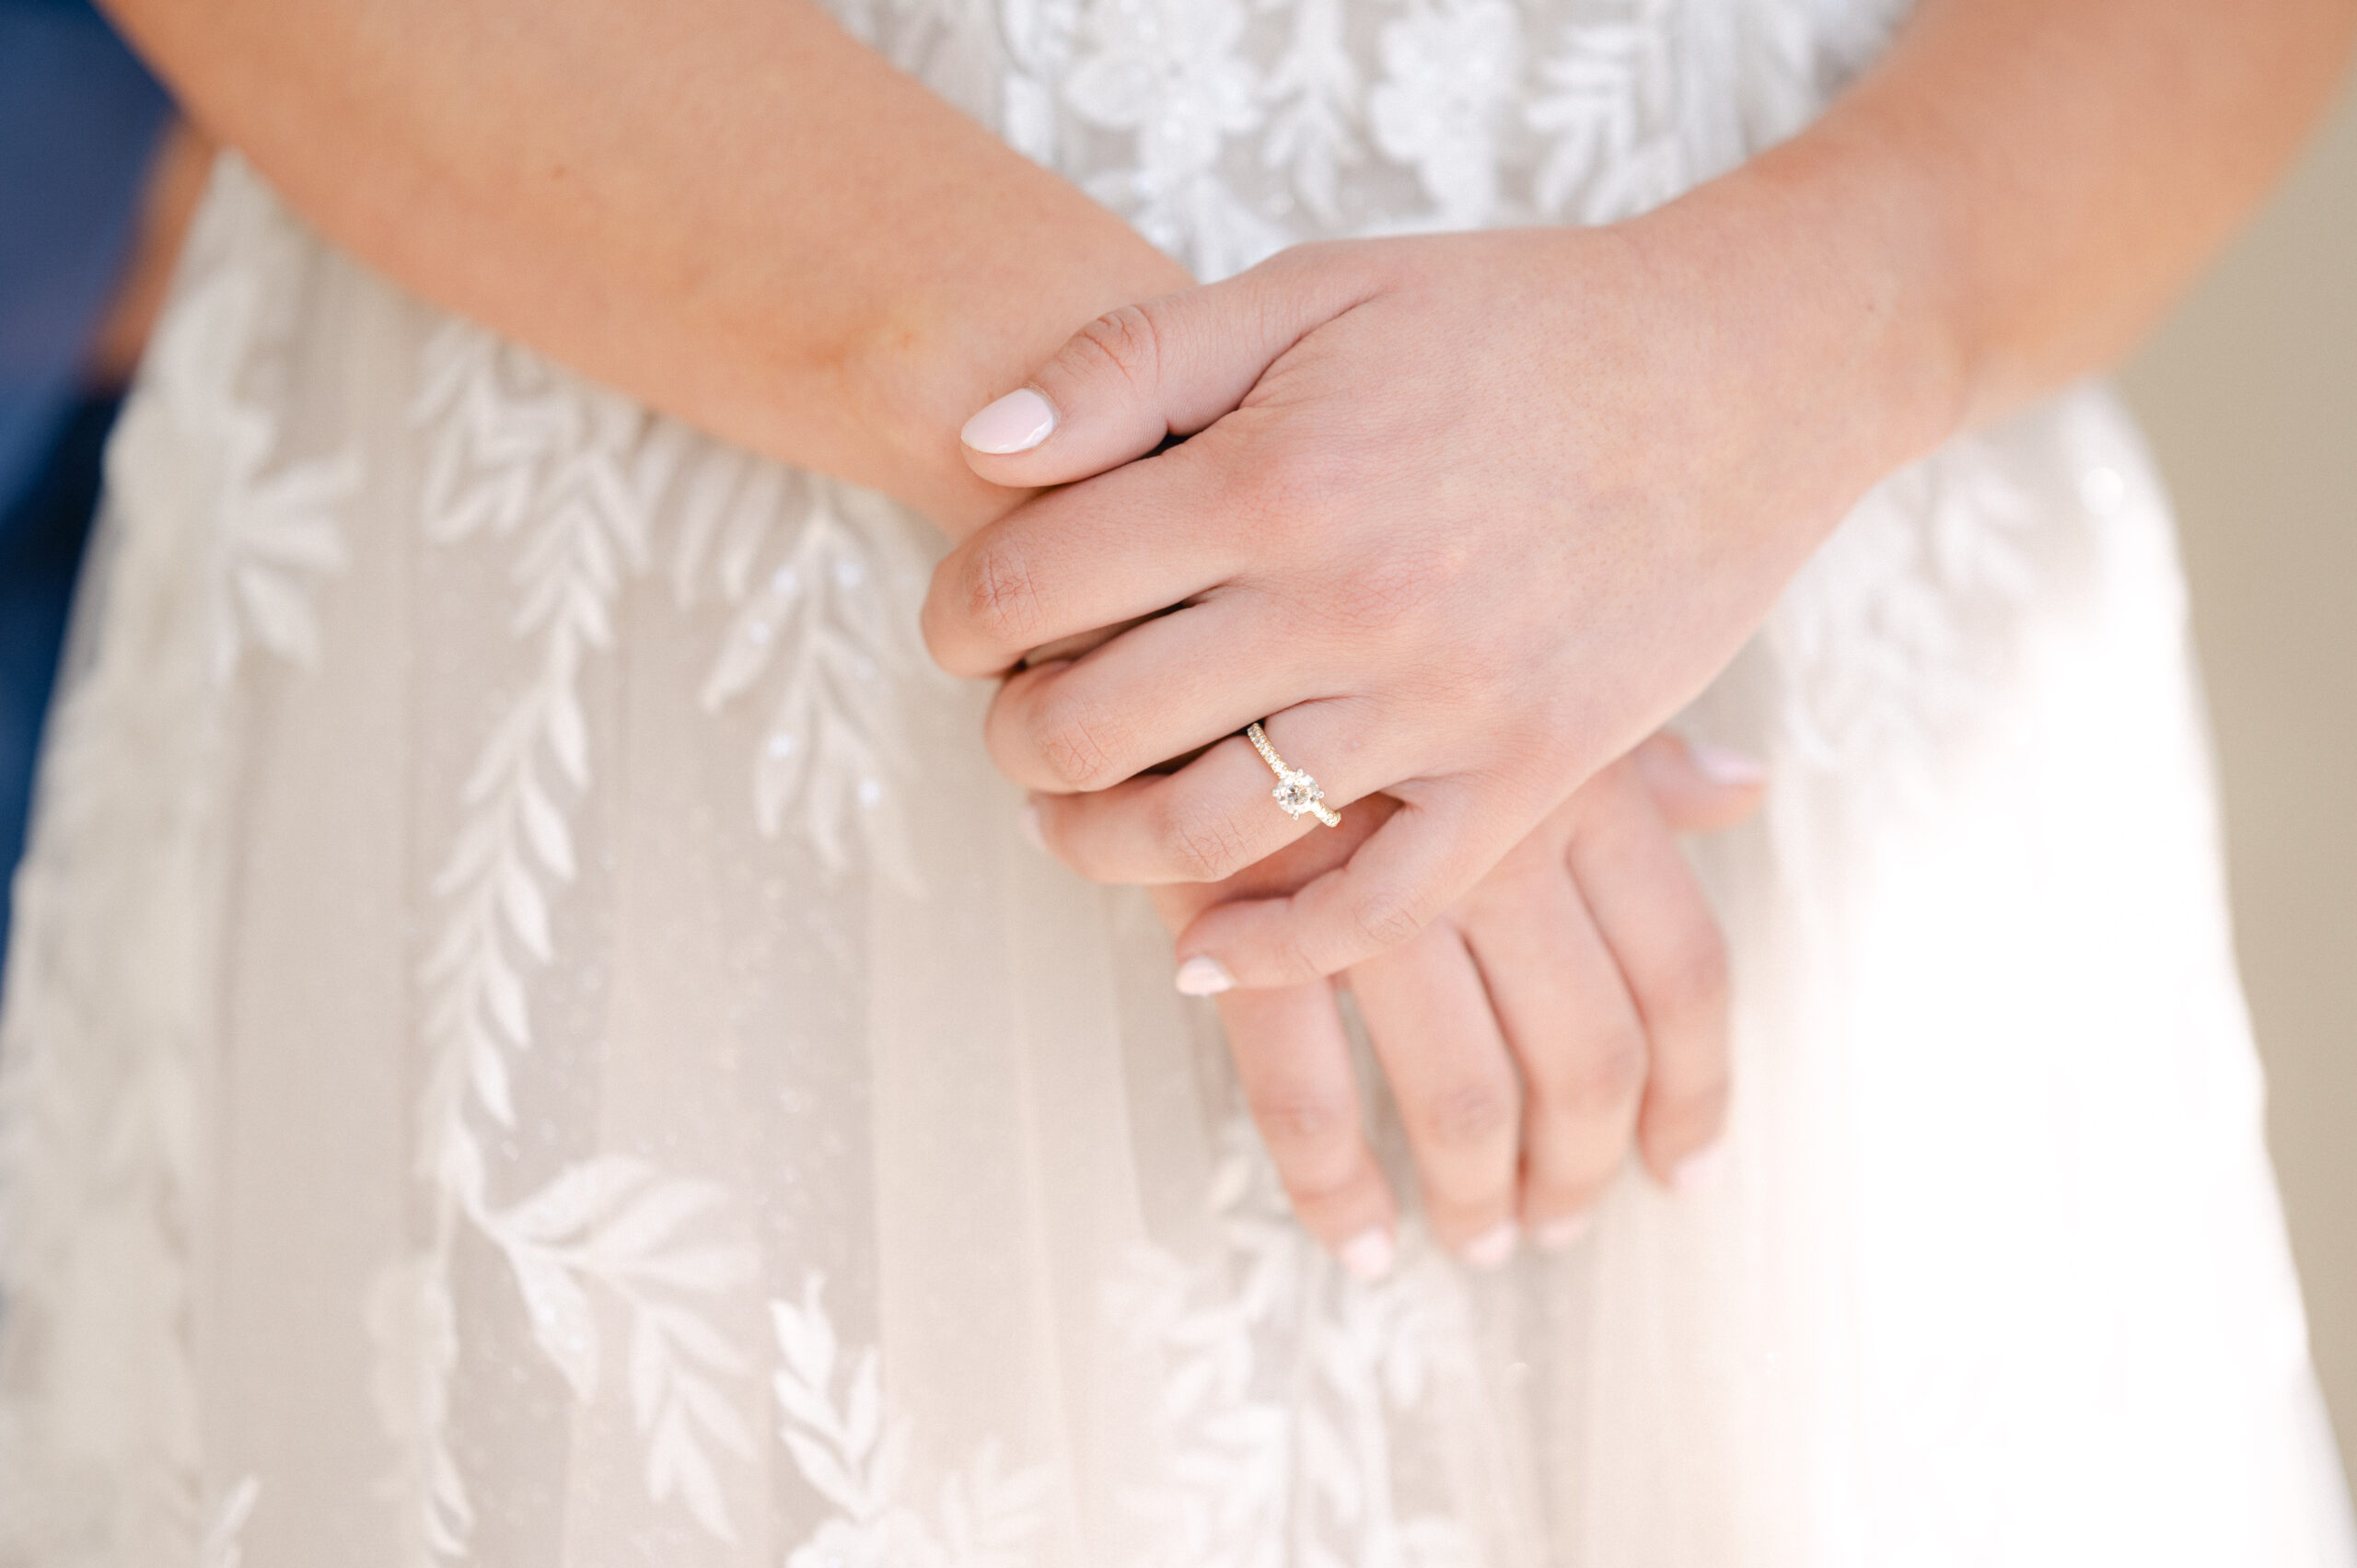 Bride wearing her engagement ring on her wedding day.